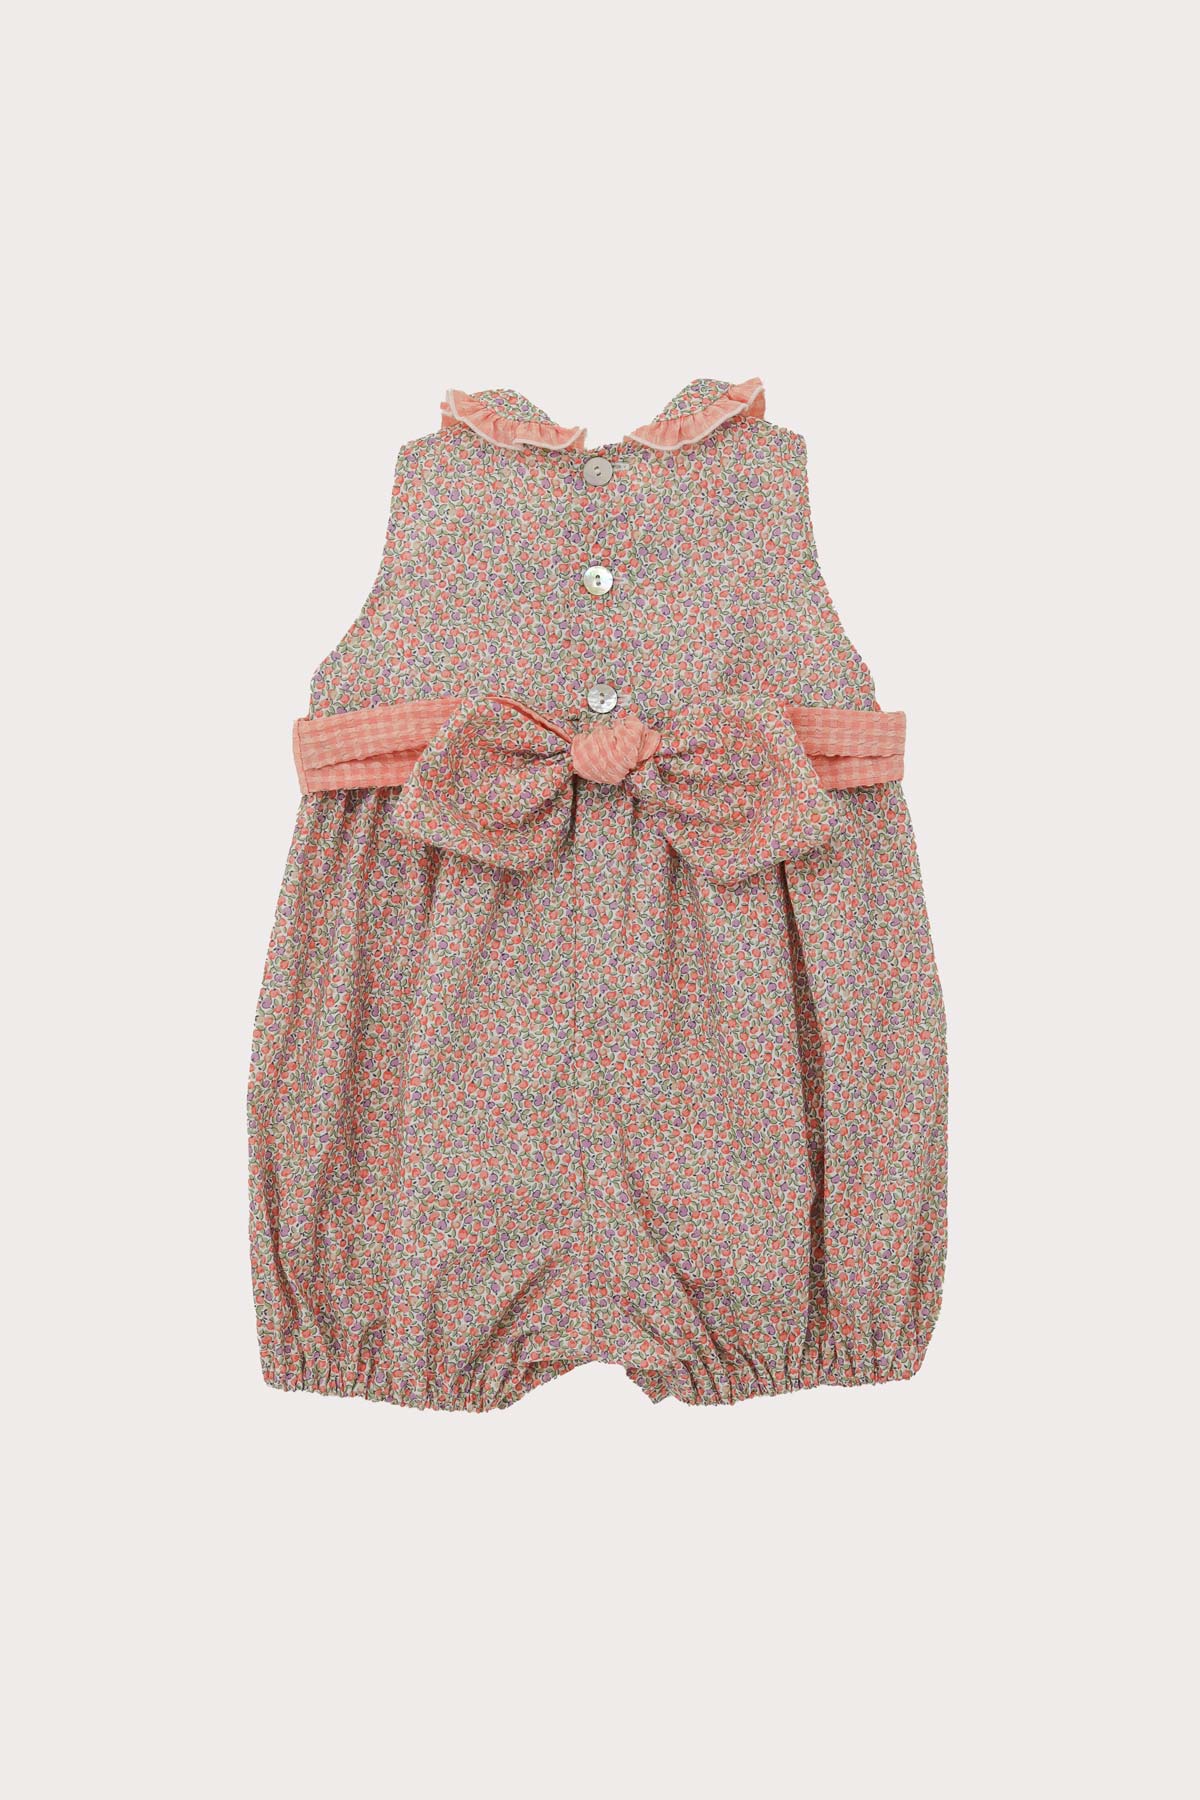 ditsy floral baby girl romper with tie bow